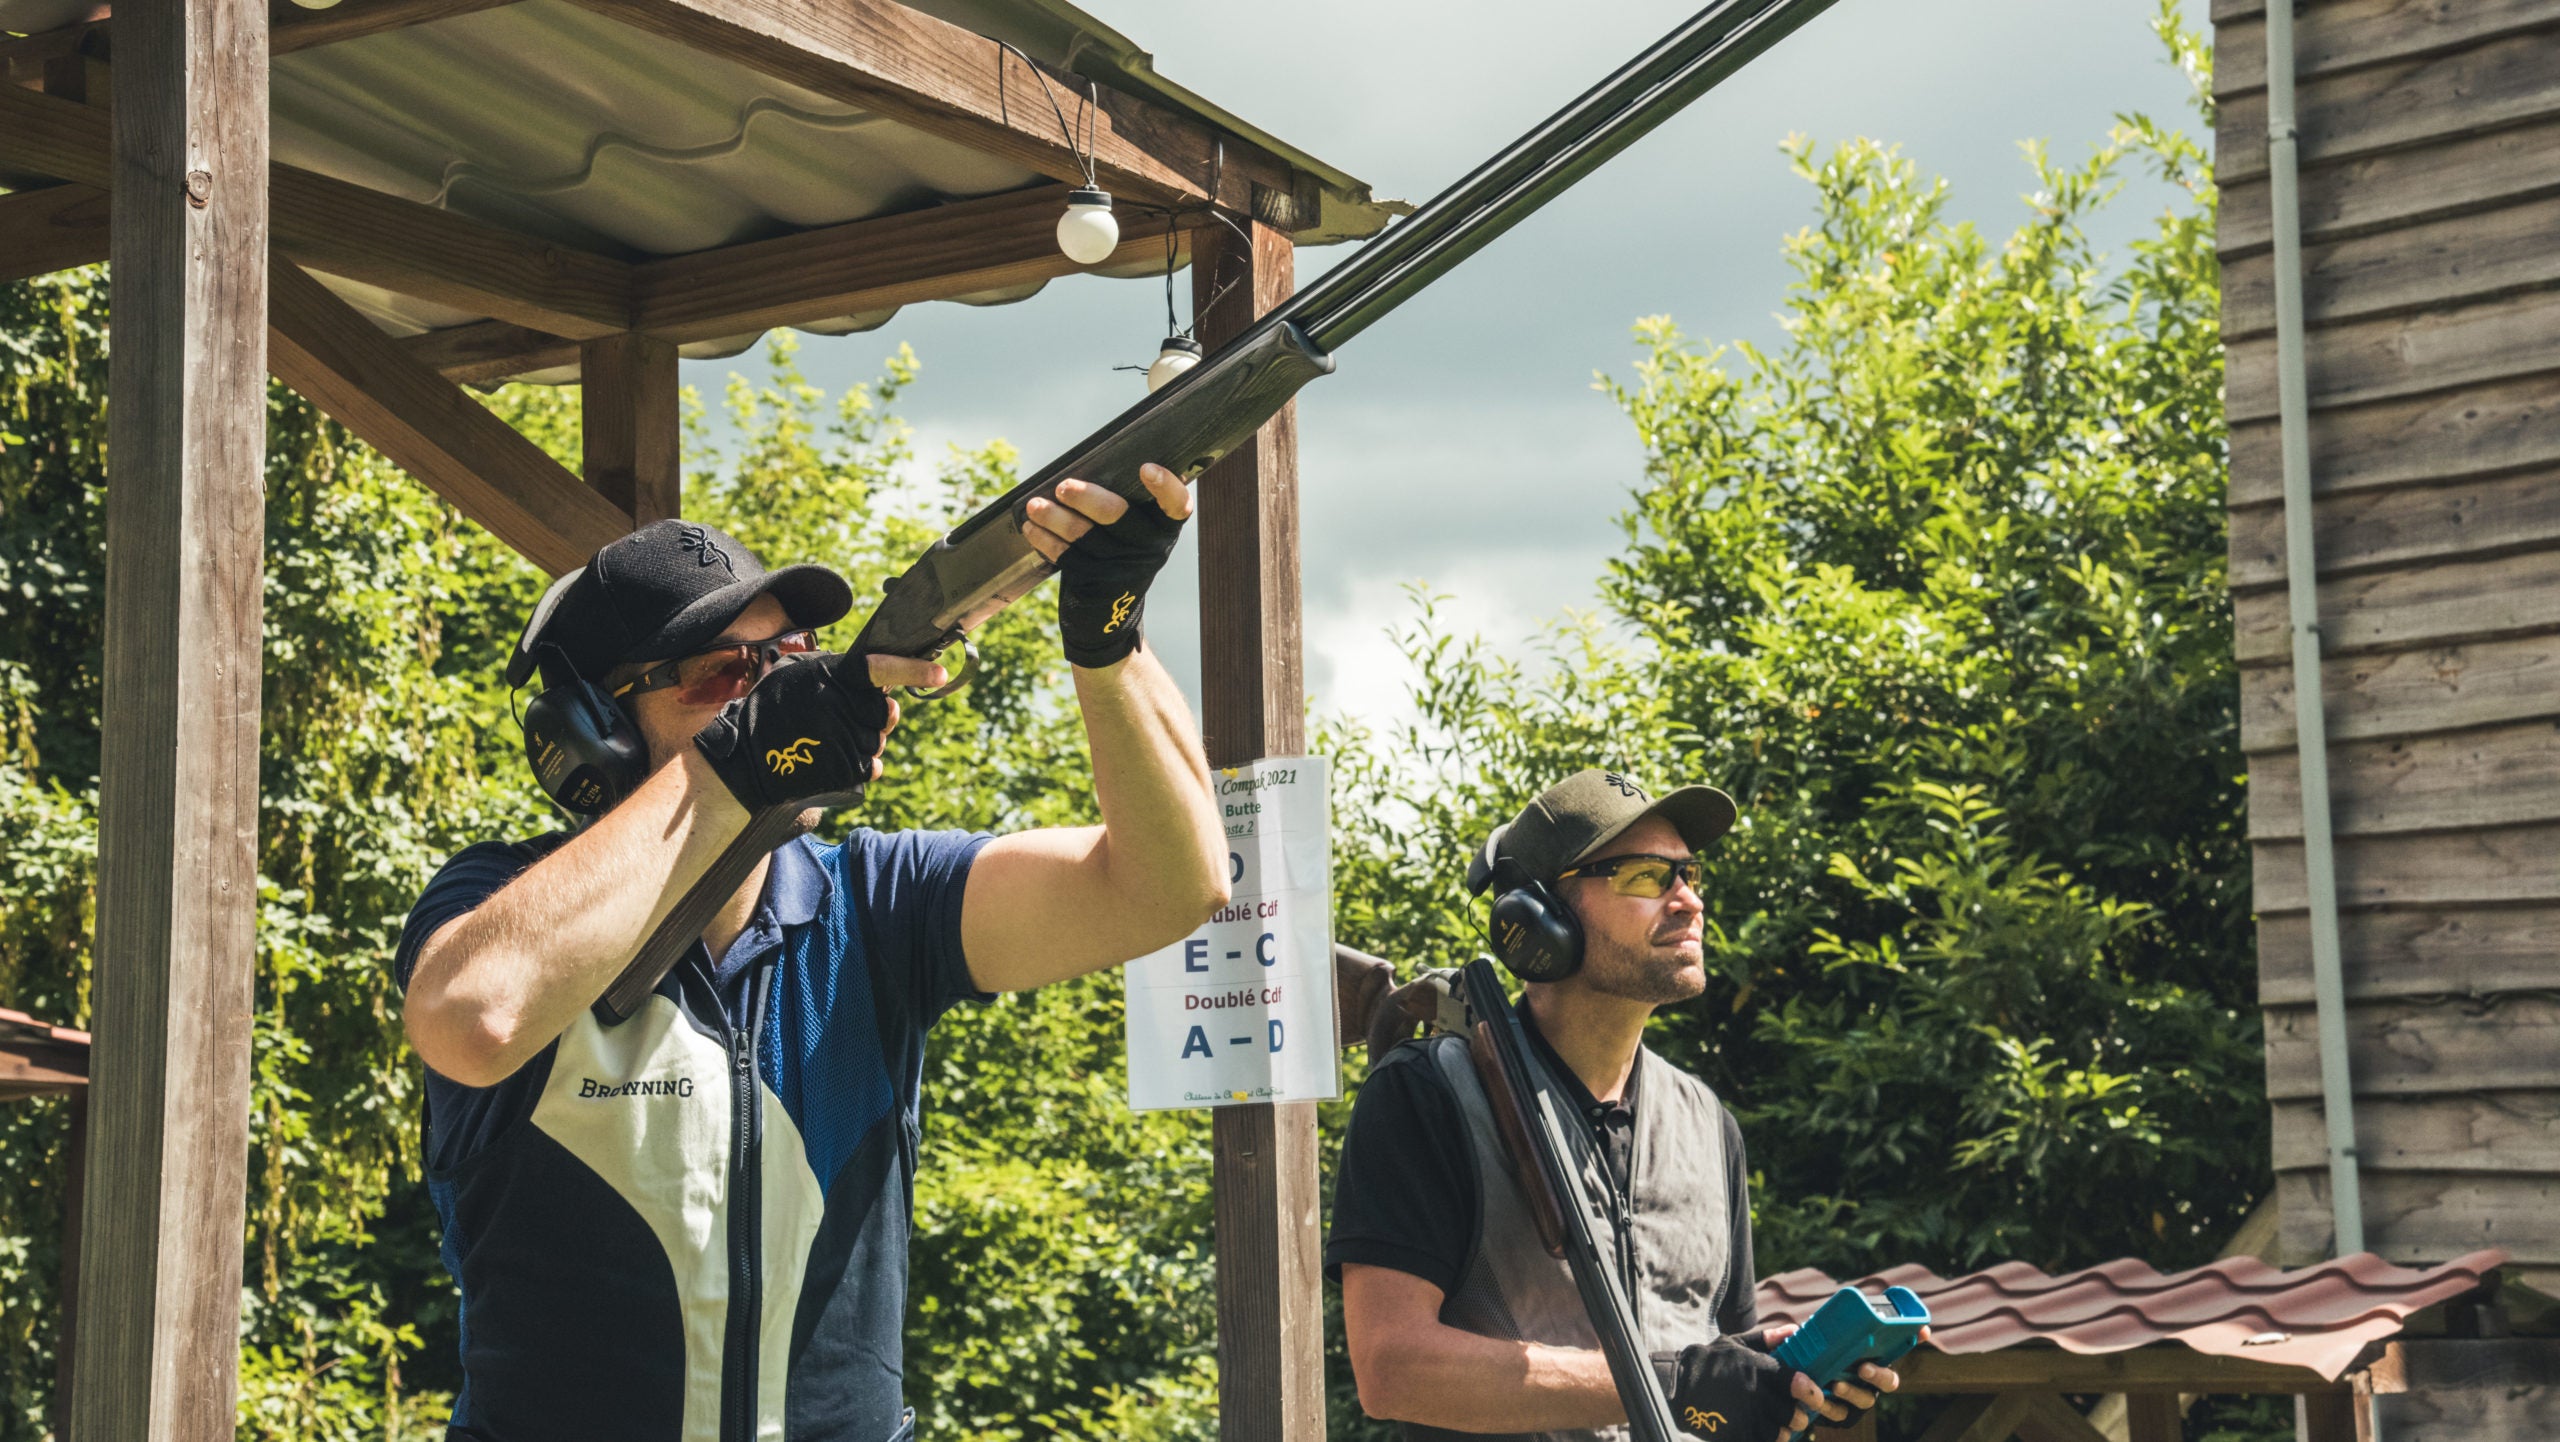 25/25 in clay shooting, a step-by-step strategy – 2. Positioning and shooting